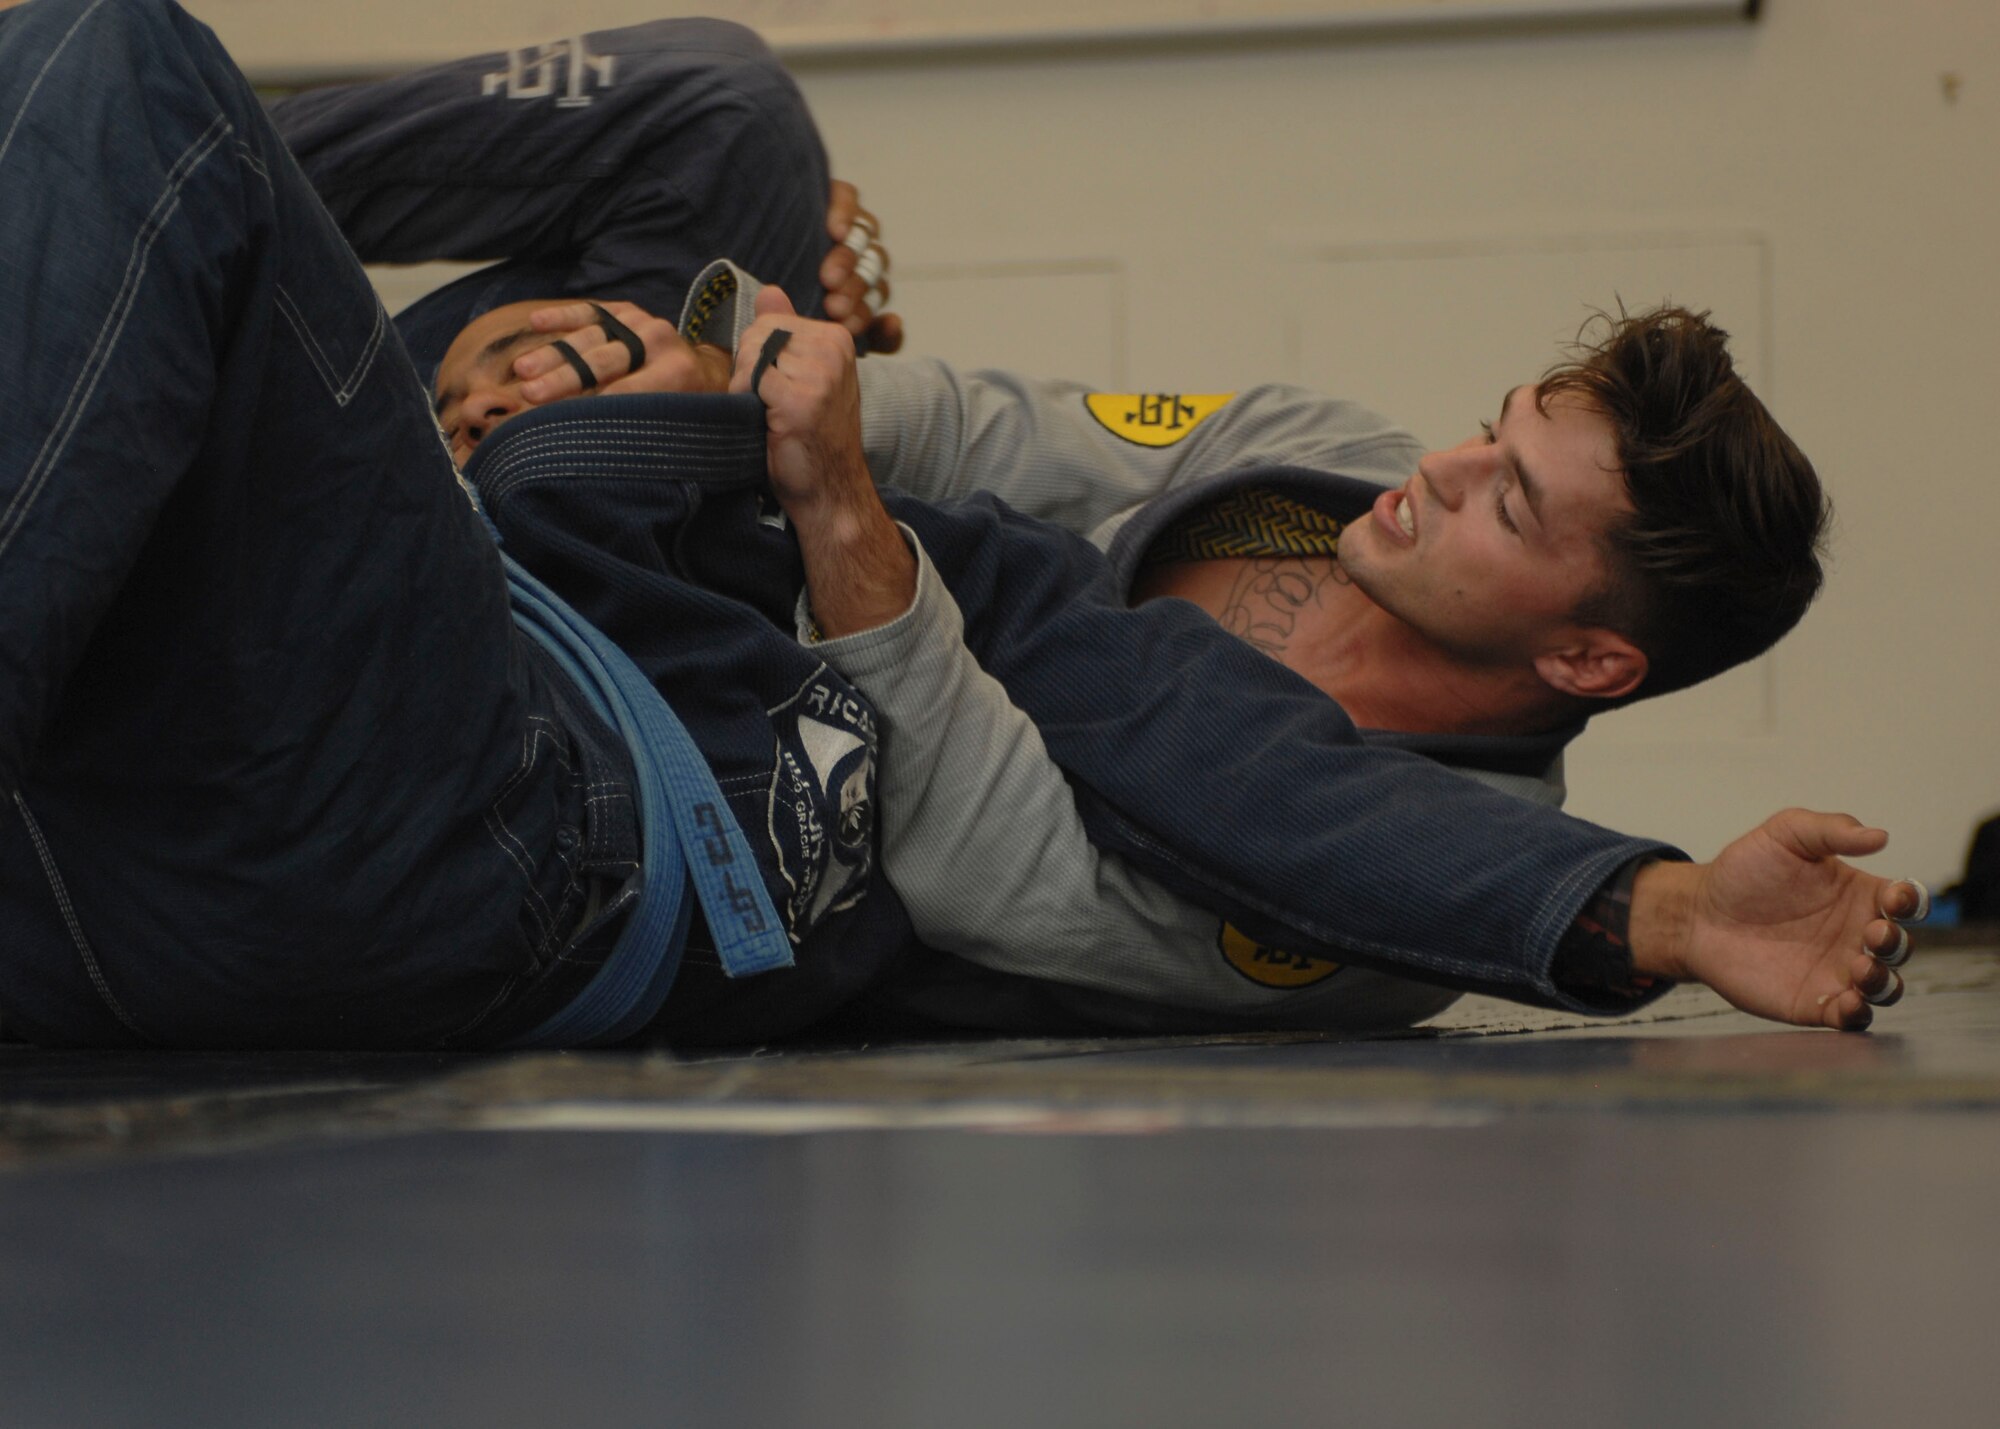 U.S. Air Force Senior Airman Jeremiah Garber, 355th Maintenance Group analyst, spars with Garrett Clark, Air Force veteran and jiujitsu instructor, during Brazilian Jujitsu class at Davis-Monthan Air Force Base, Ariz., Sept. 30, 2015. Jiujitsu consists of two submissions; joint manipulation and chokes; there’s no striking and throwing is frowned upon. (U.S. Air Force photo by Airman Basic Nathan H. Barbour/Released)